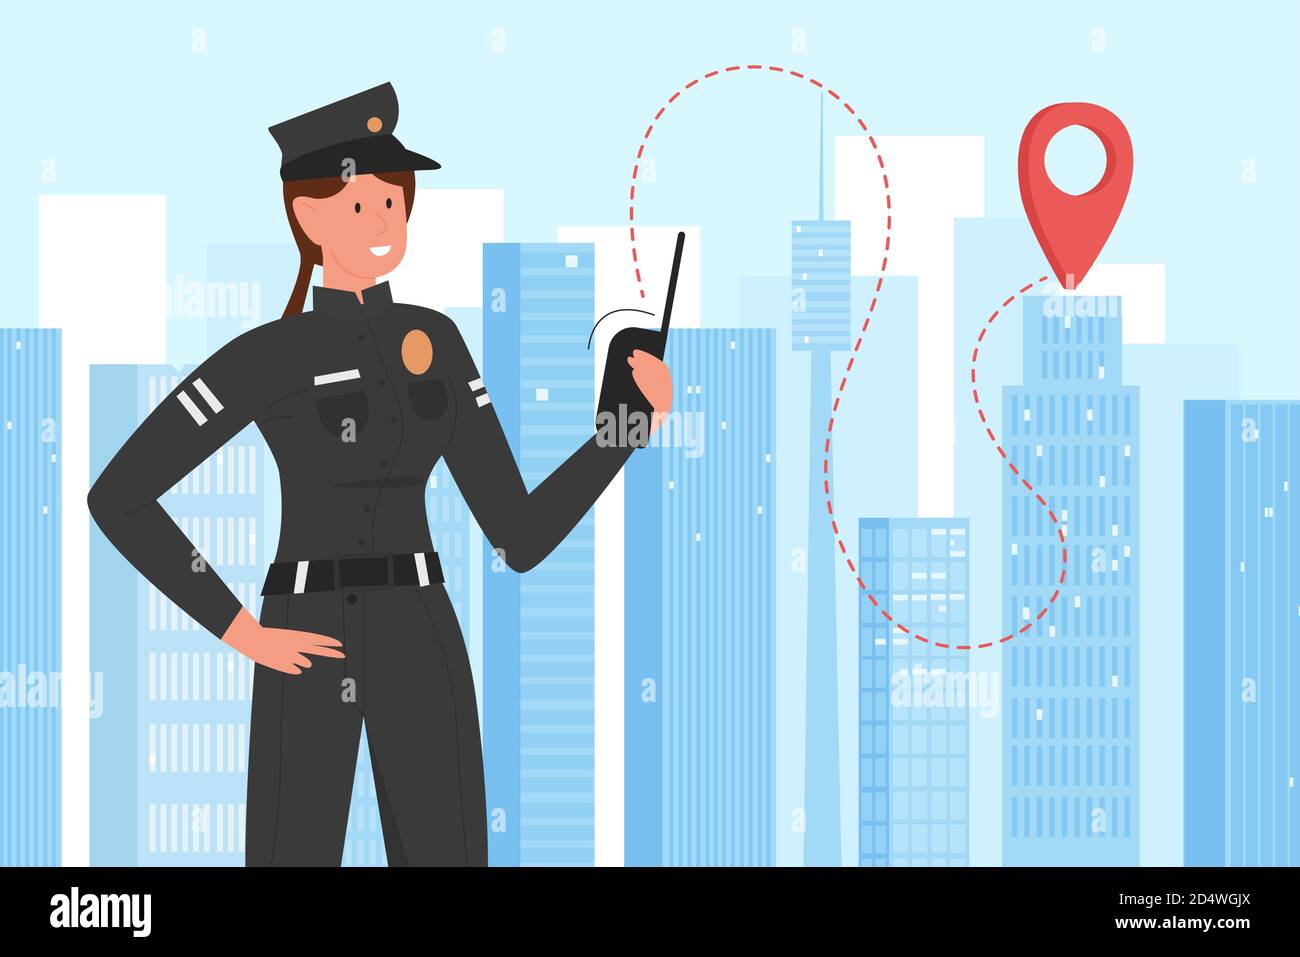 Police officer working in cityscape vector illustration. Cartoon flat professional policeofficer patrol female character in uniform standing on city street, policewoman with walkie talkie background Stock Vector